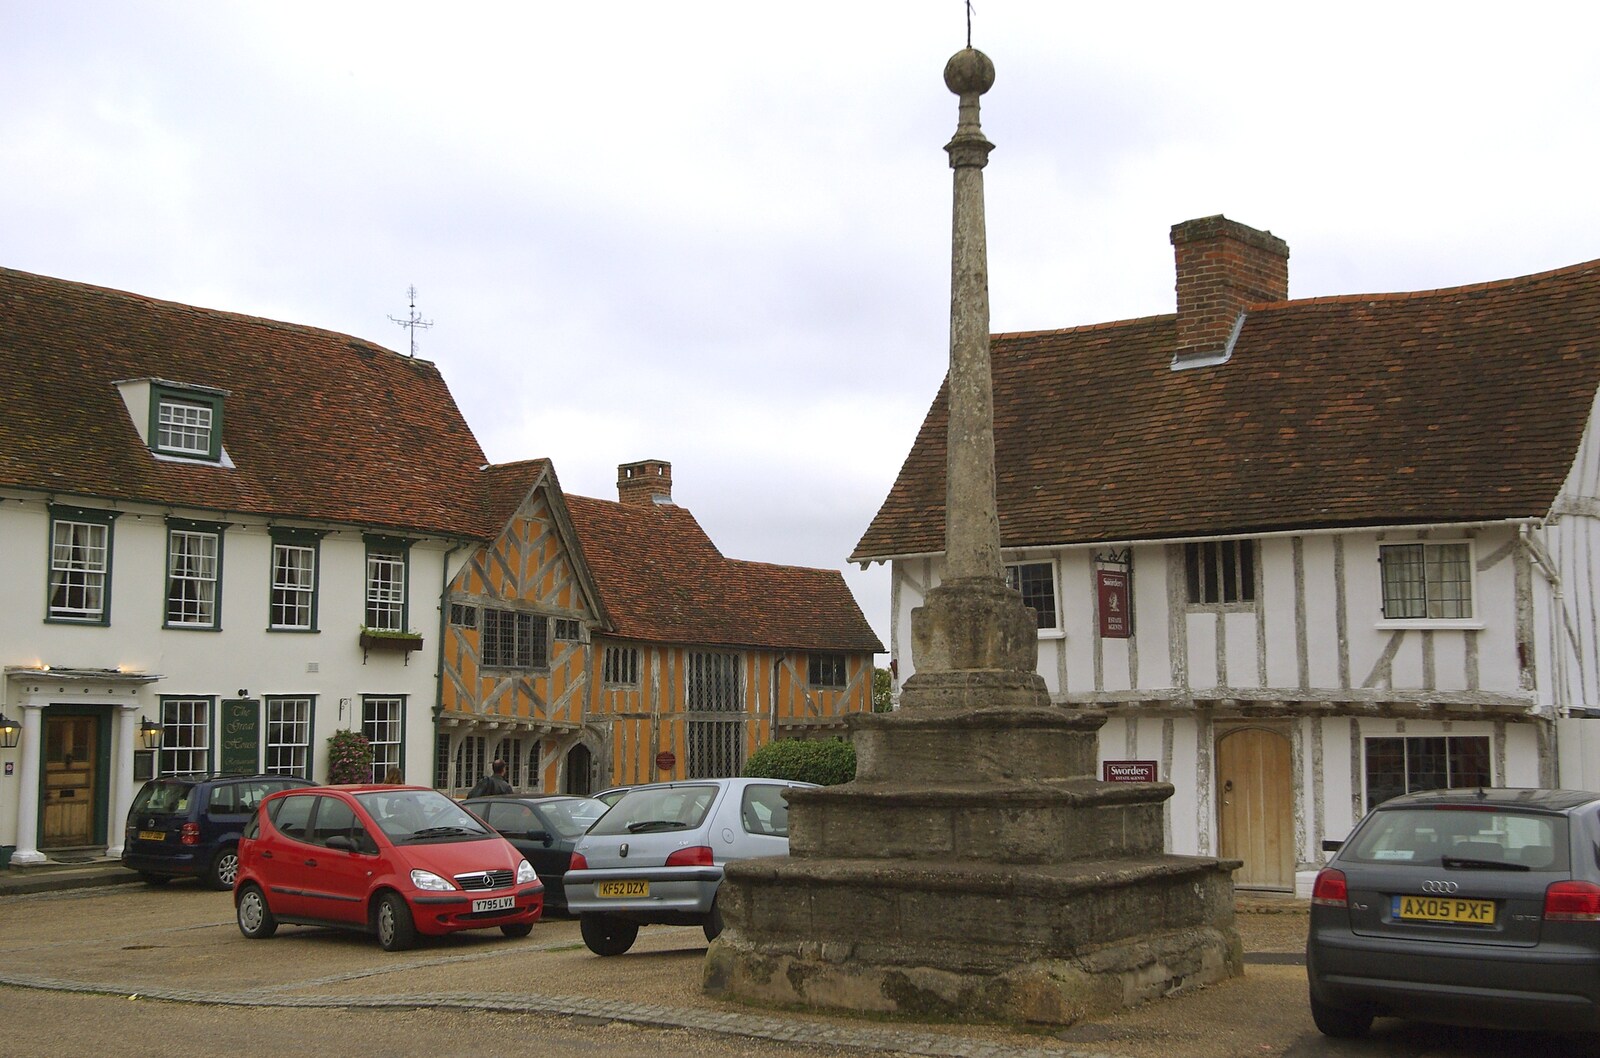 The Market Cross, Lavenham from A Road Trip in an MX-5, and Athlete at the UEA, Lavenham and Norwich - 14th October 2007